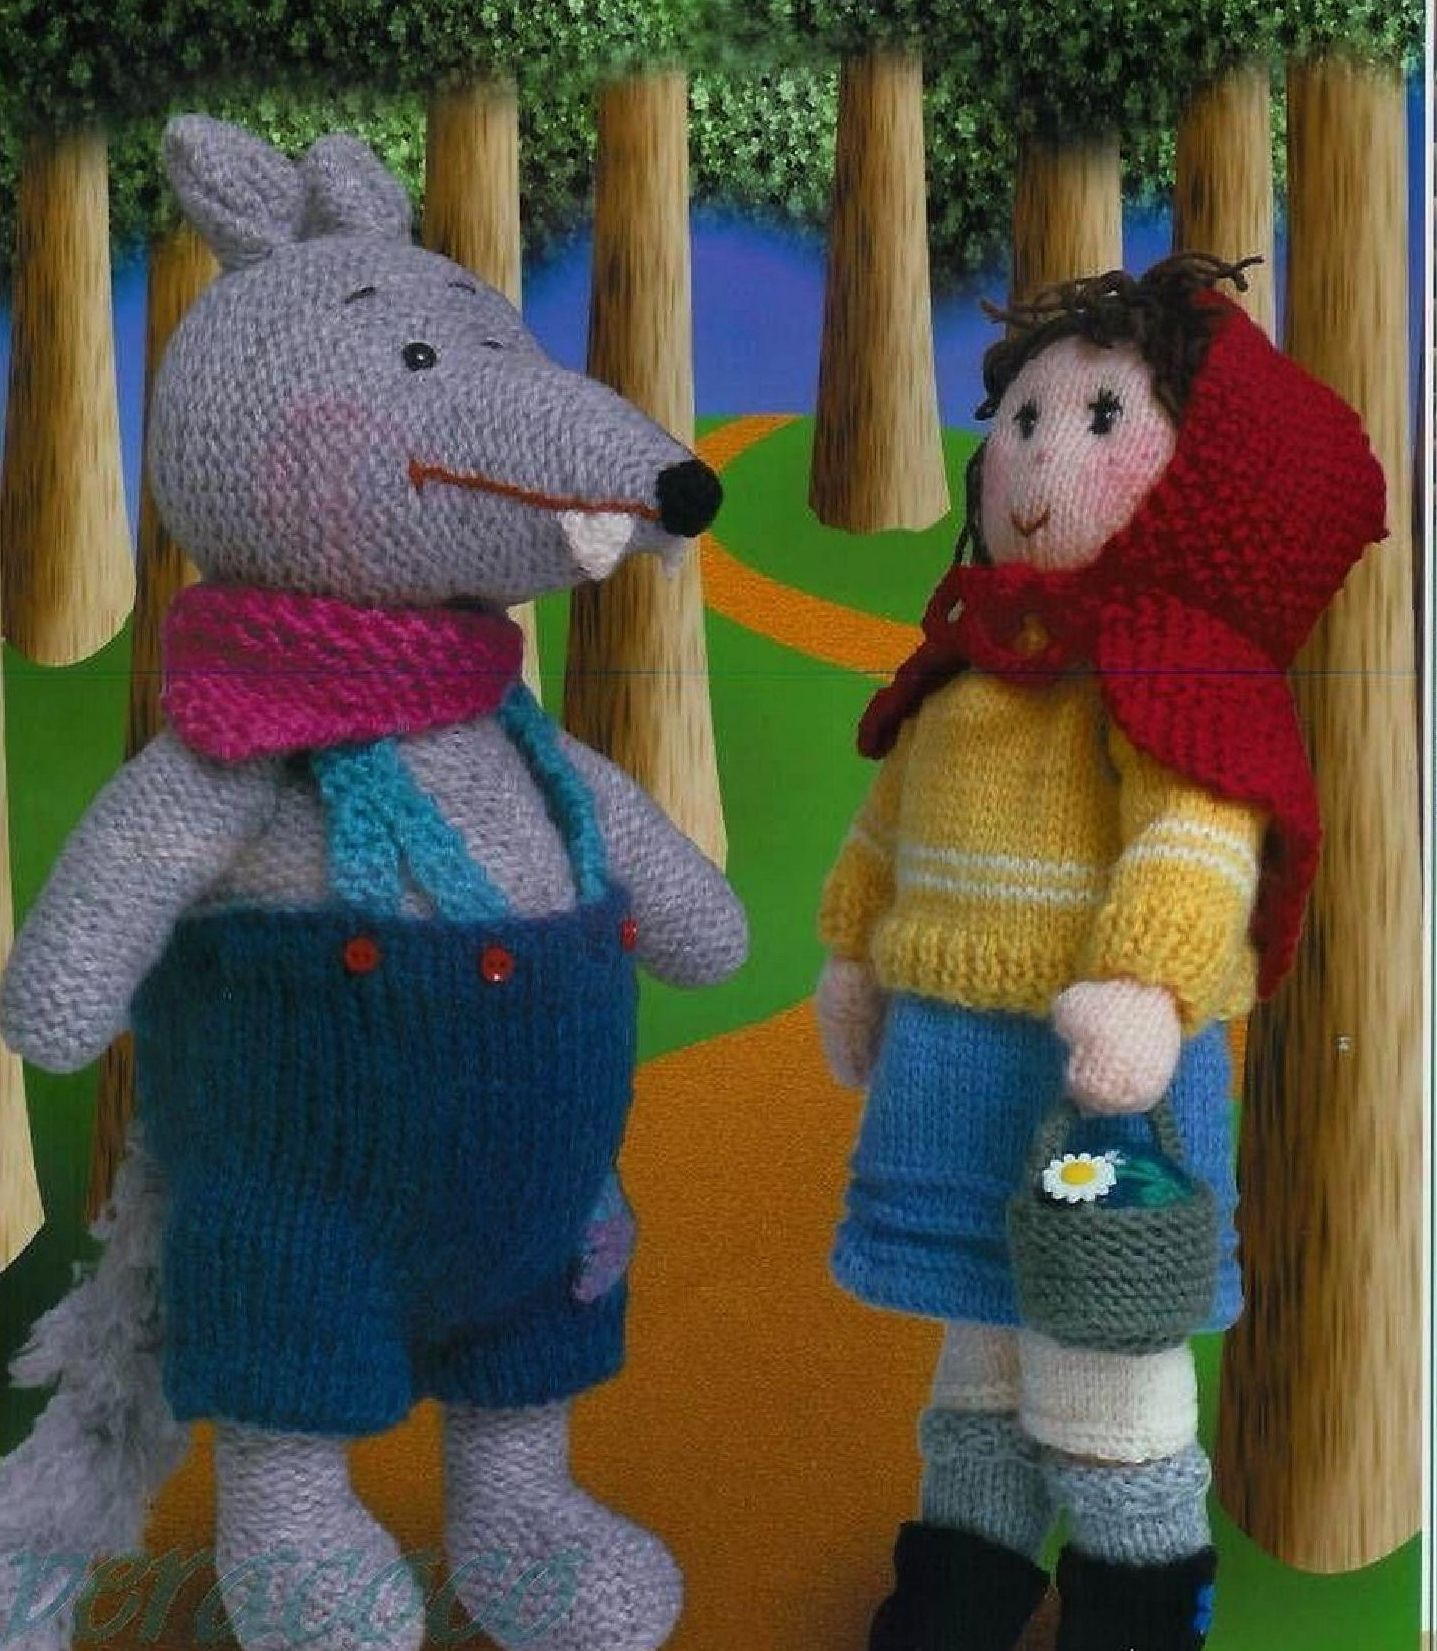 Knitting Patterns For Toys Uk Pdf Digital Download Vintage Knitting Pattern To Make Little Red Riding Hood And The Wolf Stuffed Soft Body Fairy Tale Dolls Or Toys